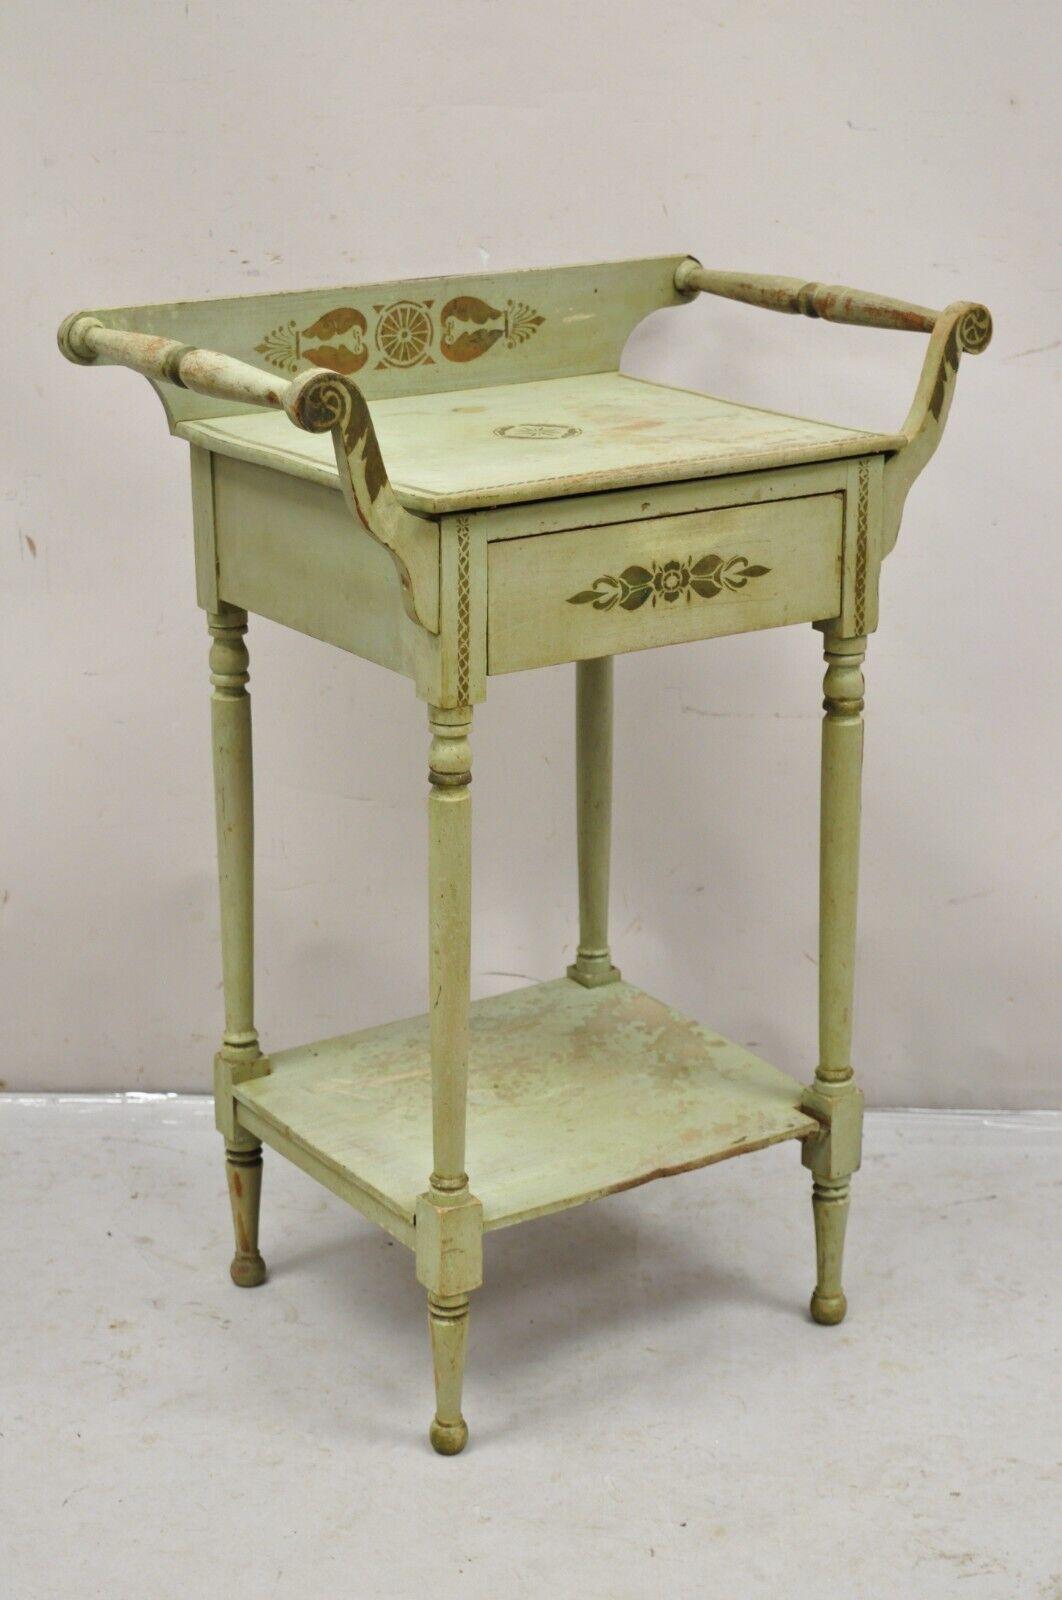 Antique French Country Primitive Green Painted Hitchcock Style Washstand Commode. Item features one dovetailed drawer, green distressed painted finish, stencil painted details, lower shelf, very nice antique item. Circa Early 1900s. Measurements: